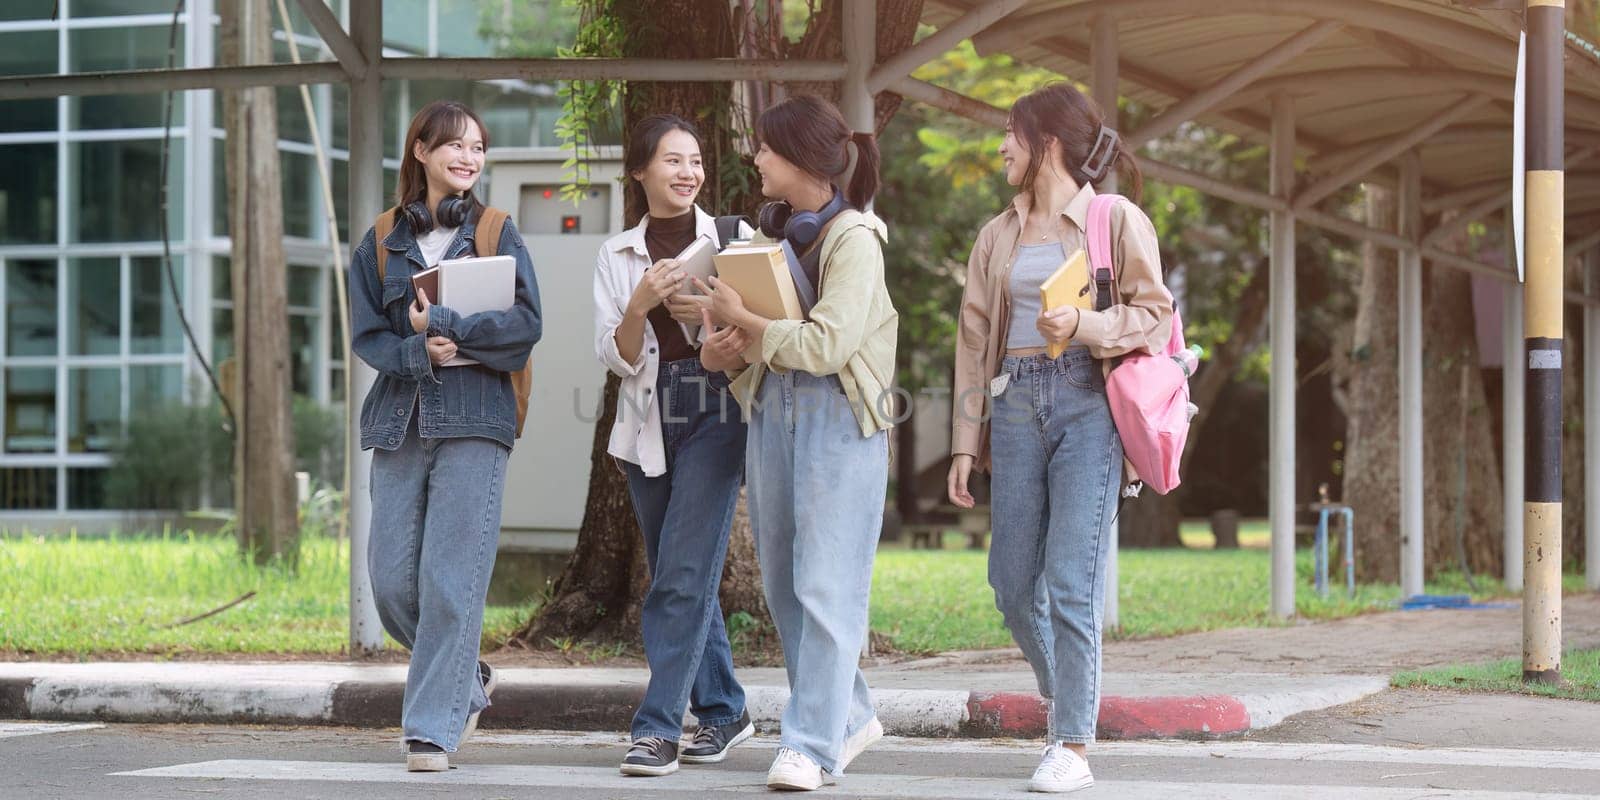 Group of Young Asian student walking and talking at university before class room. education, back to school concept.